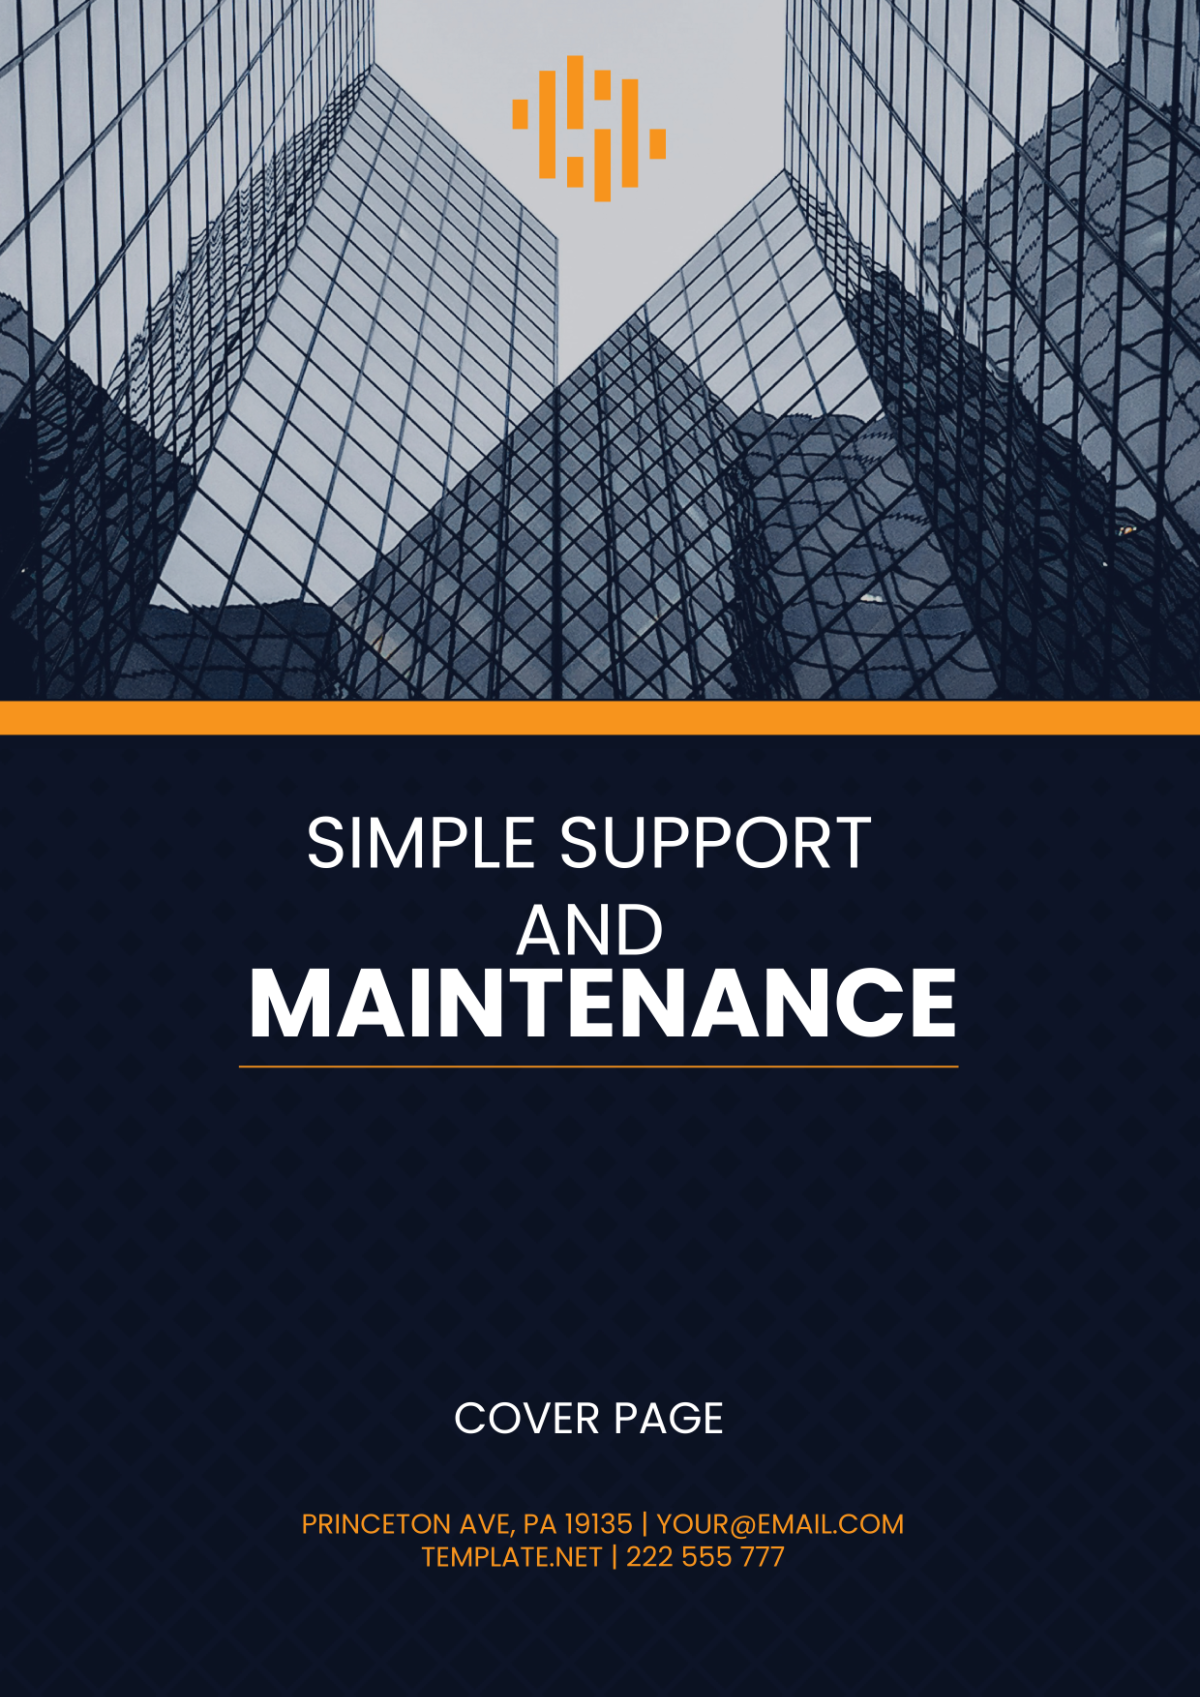 Simple Support and Maintenance Cover Page Template